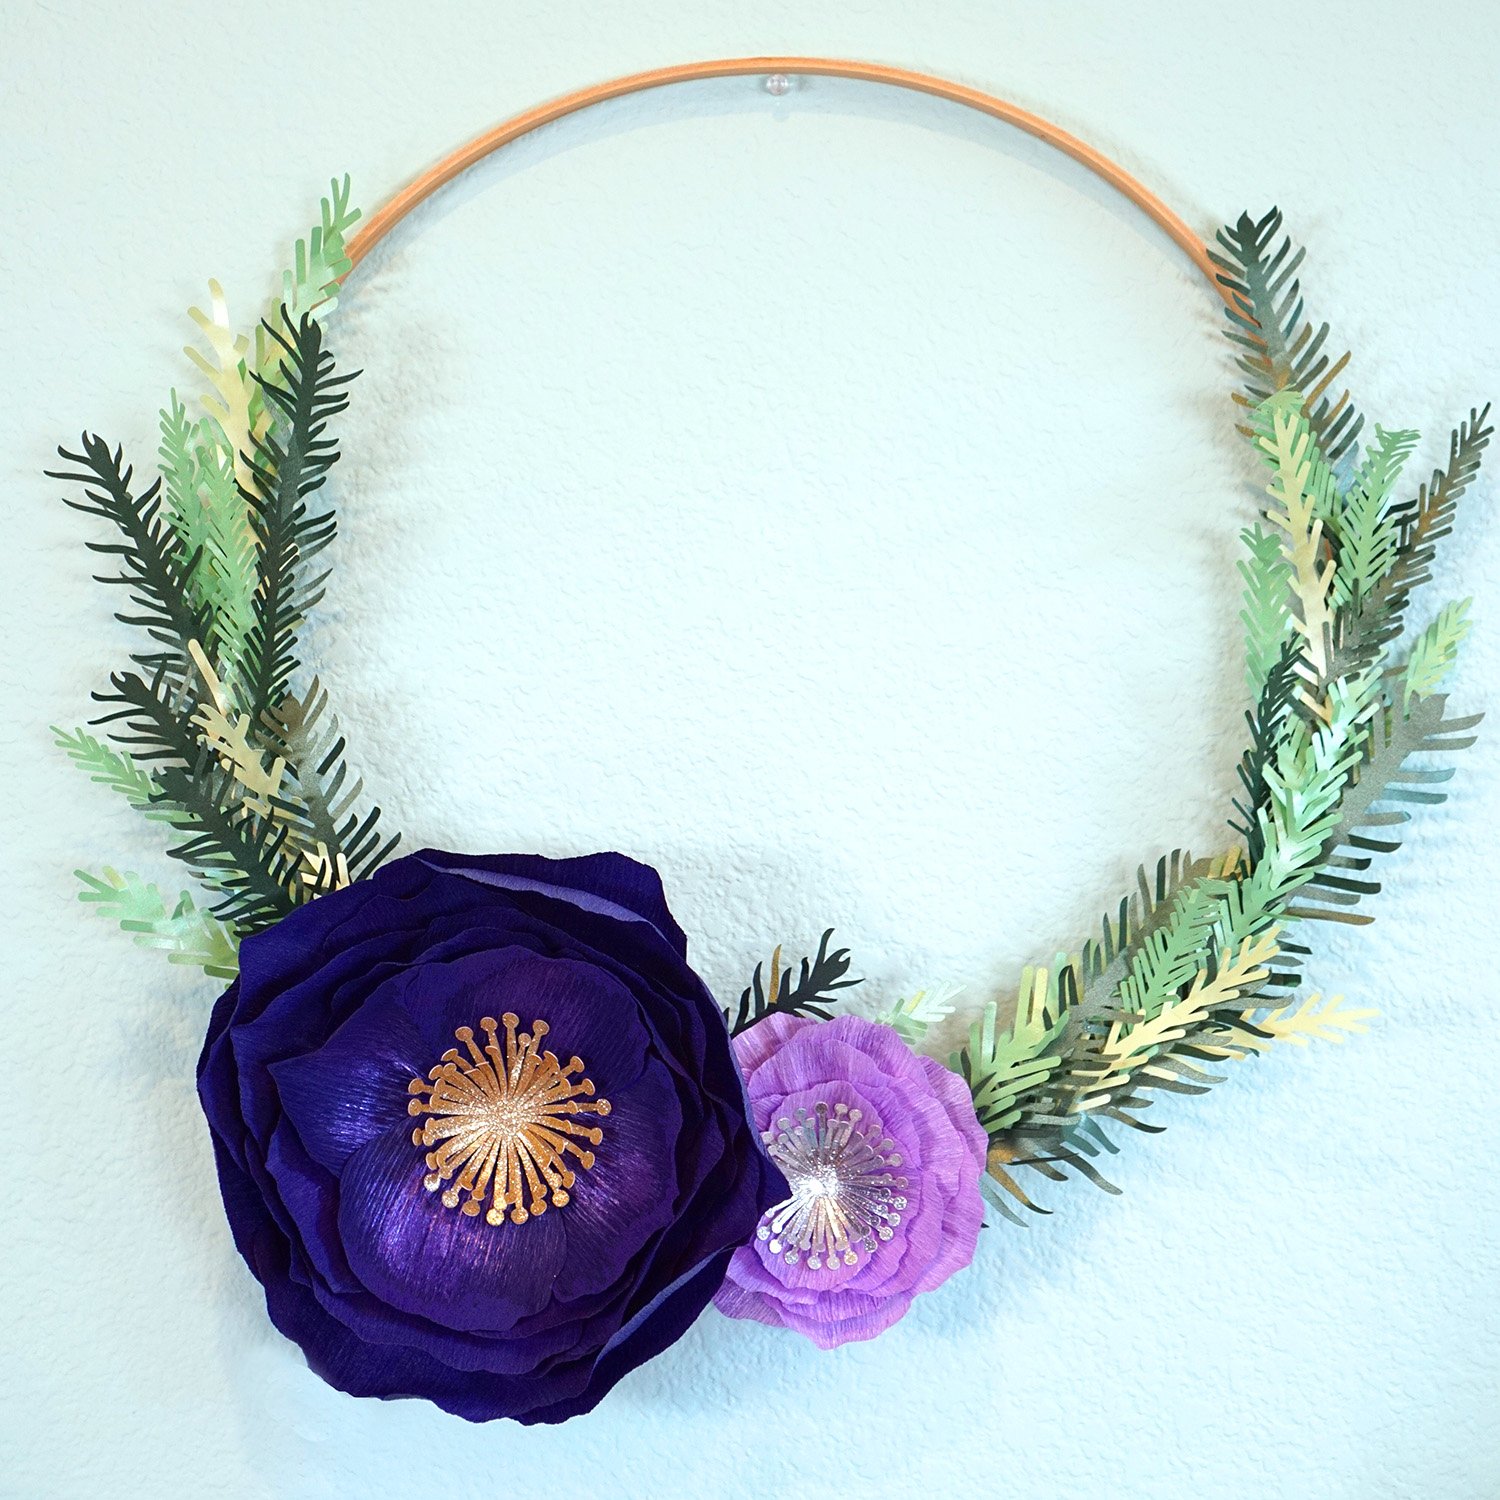 crepe paper flower wreath hung on wall